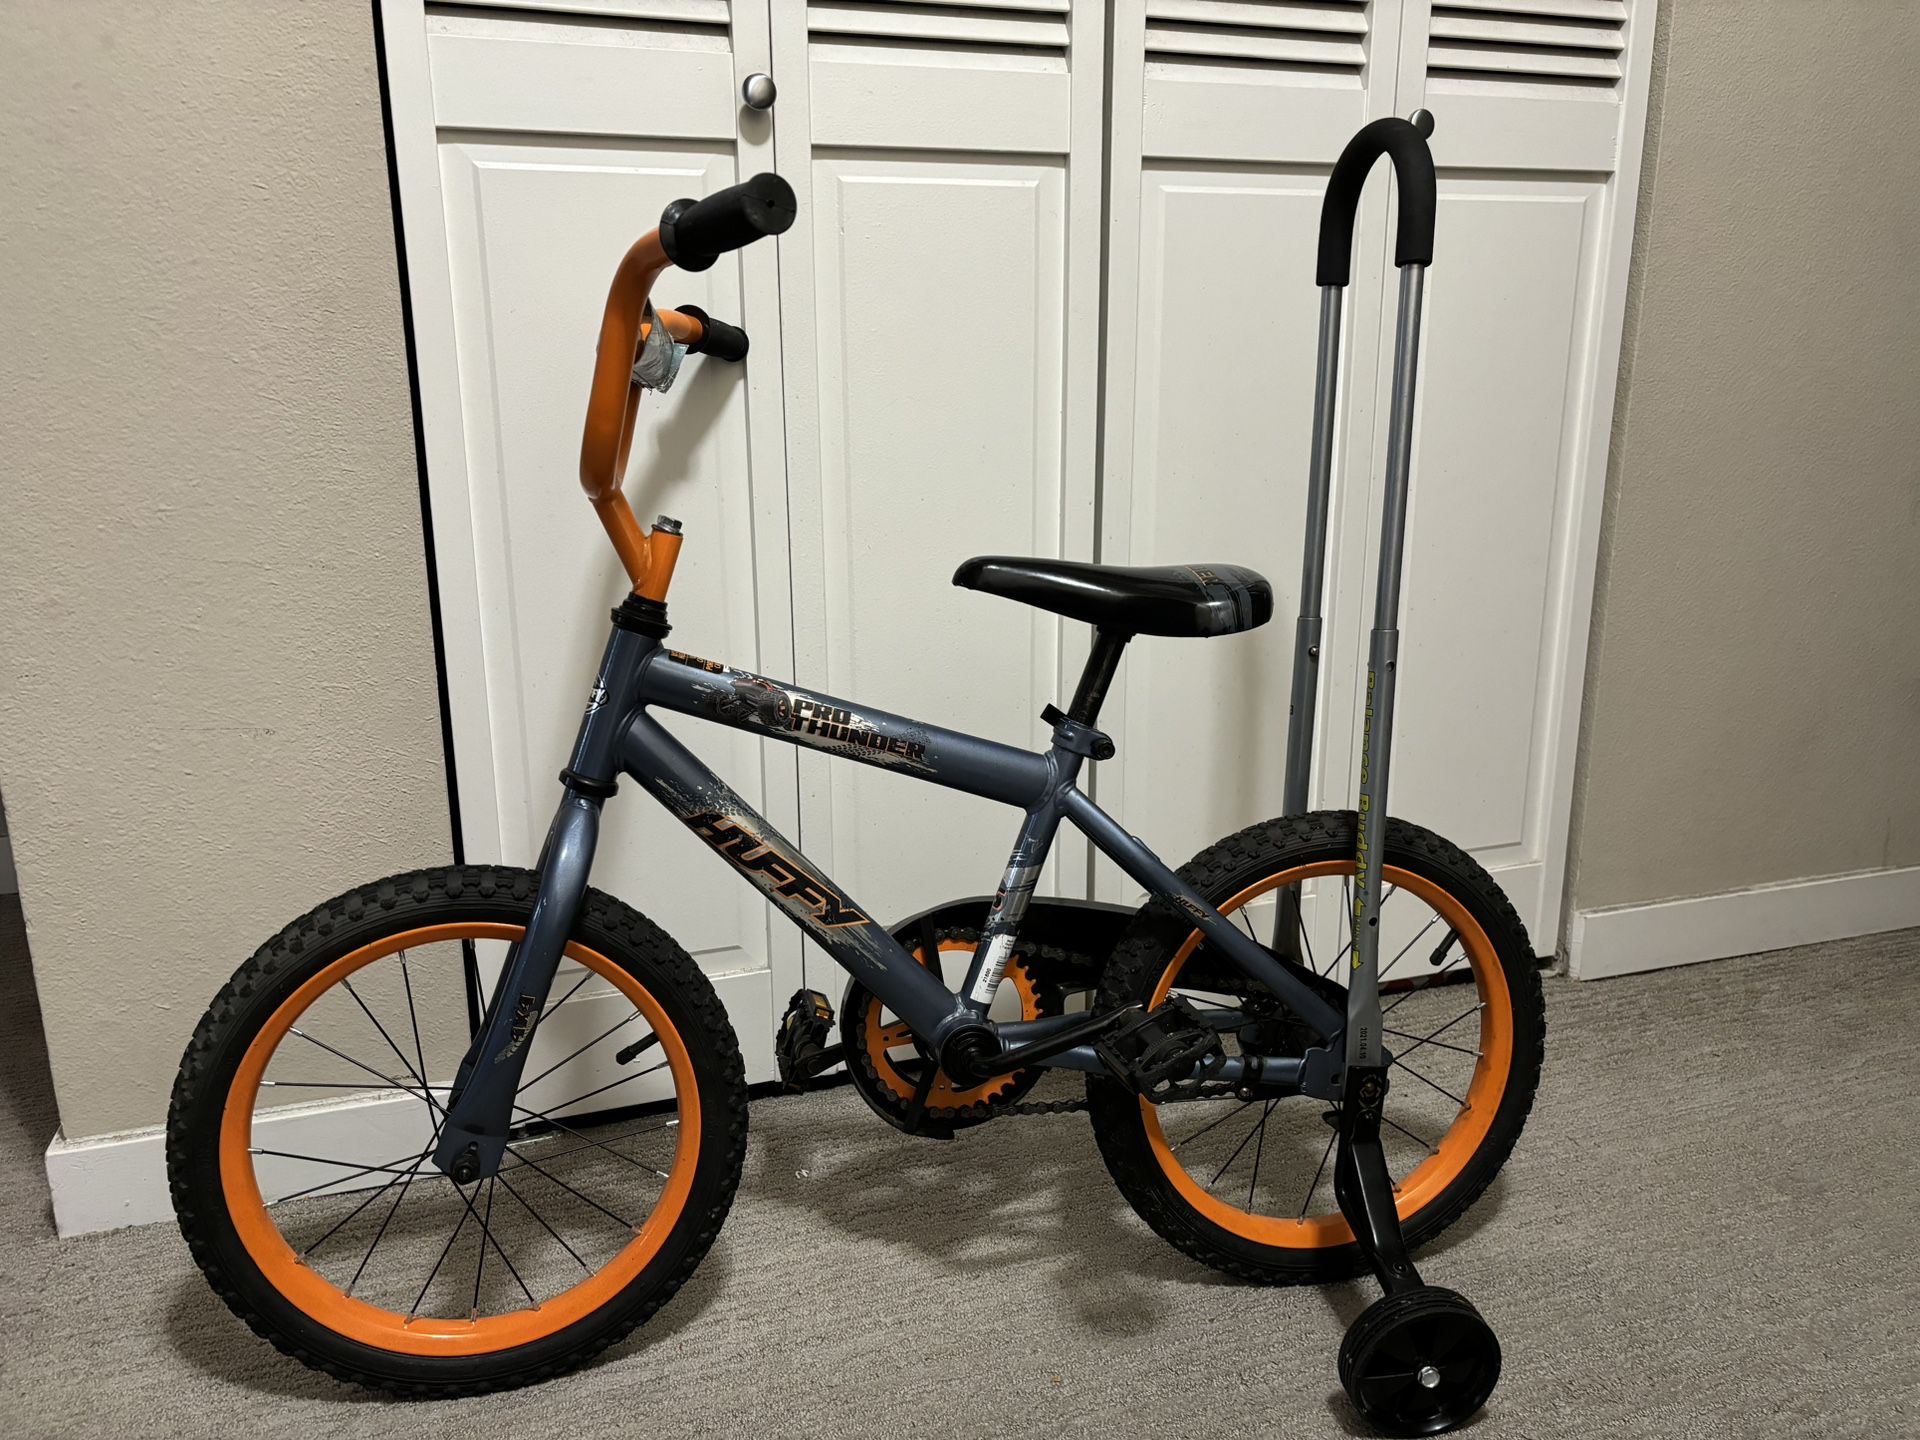 Kids Cycle Huffy Pro Thunder 16 In. And Bicycle Pump